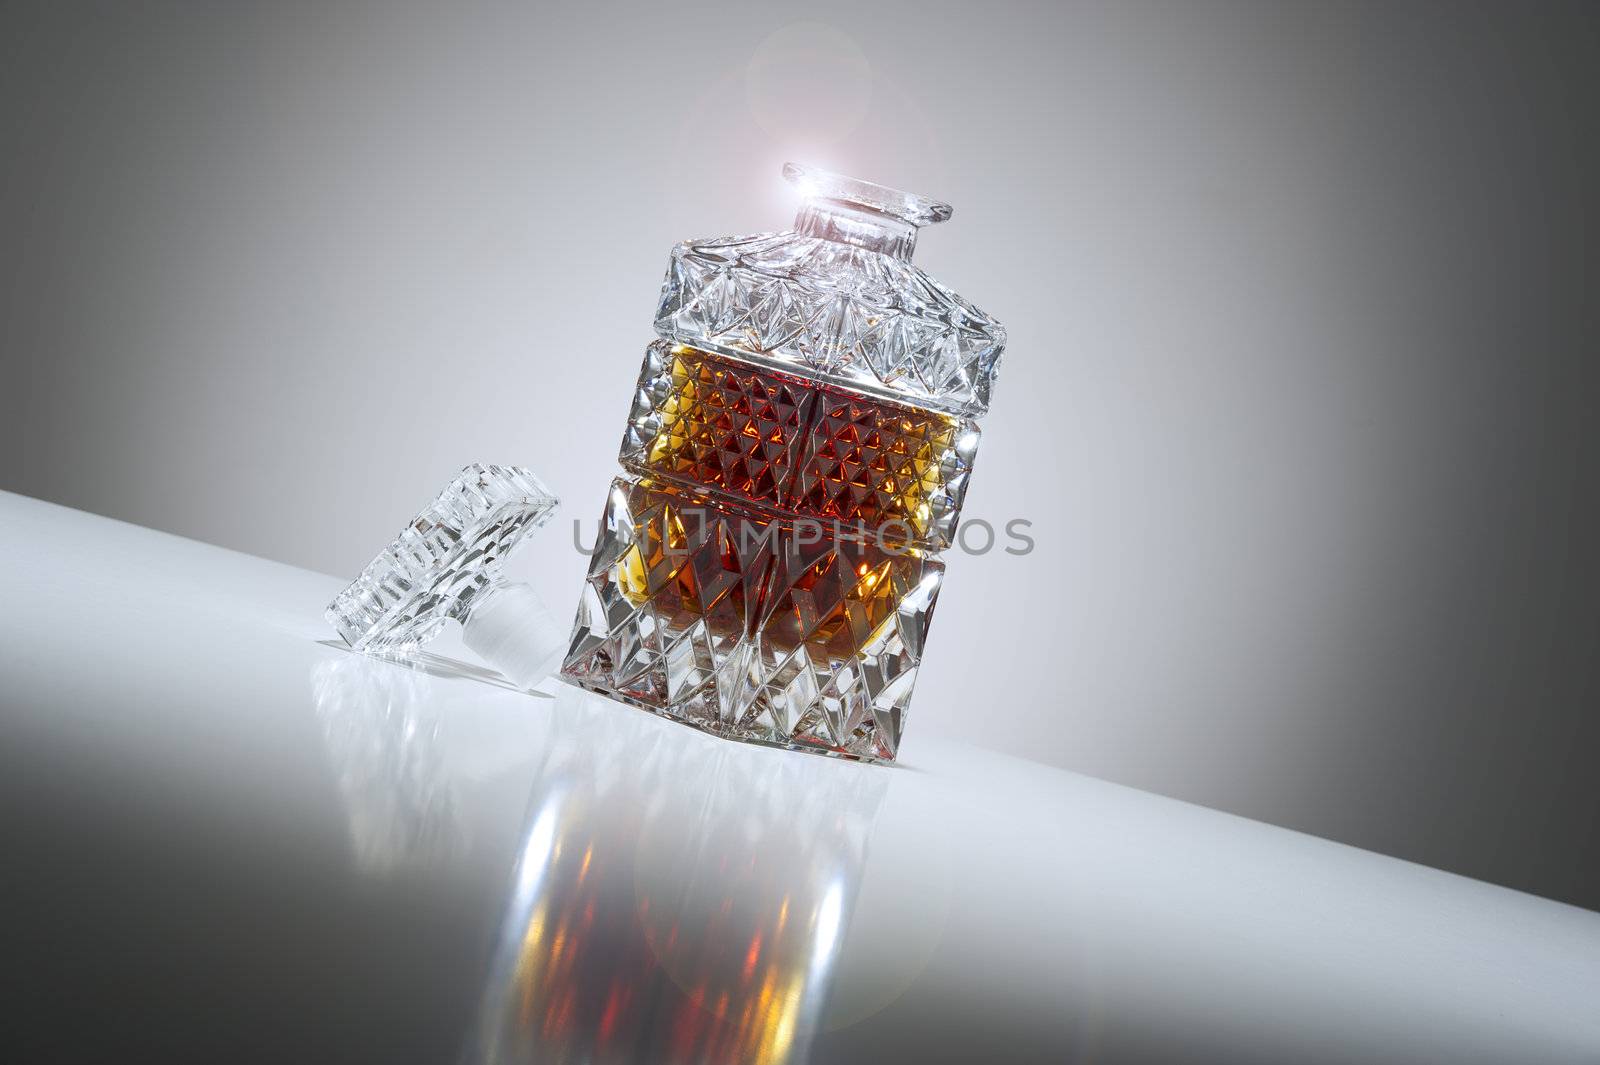 Tilted low angle view of an open elegant crystal whiskey or brandy decanter with a sparkling rim and a graduated grey background with a highlight and reflection